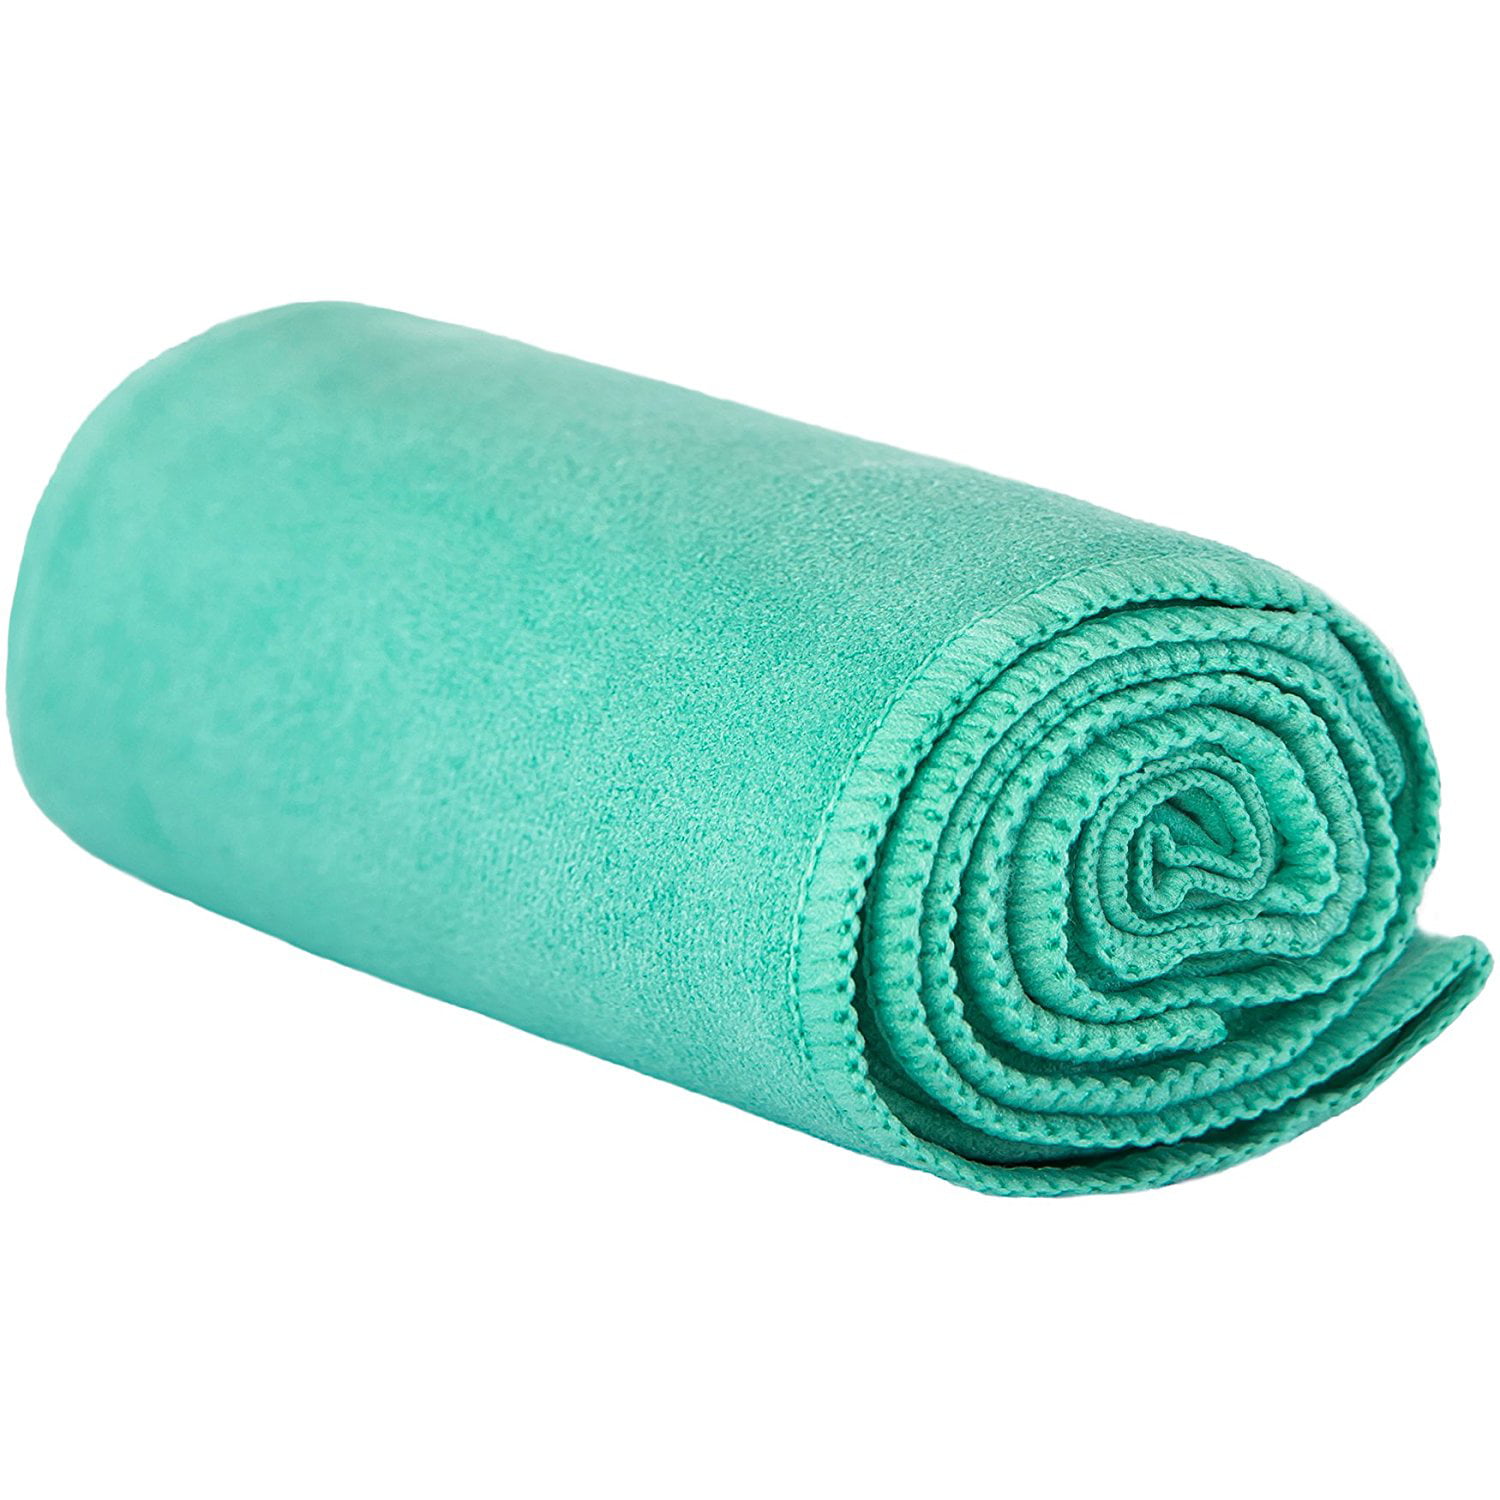 for Bikram Pilates and Yoga Mats. GoSweat Non-Slip Hot Yoga Towel by Shandali with Super-Absorbent Soft Suede Microfiber in Many Colors